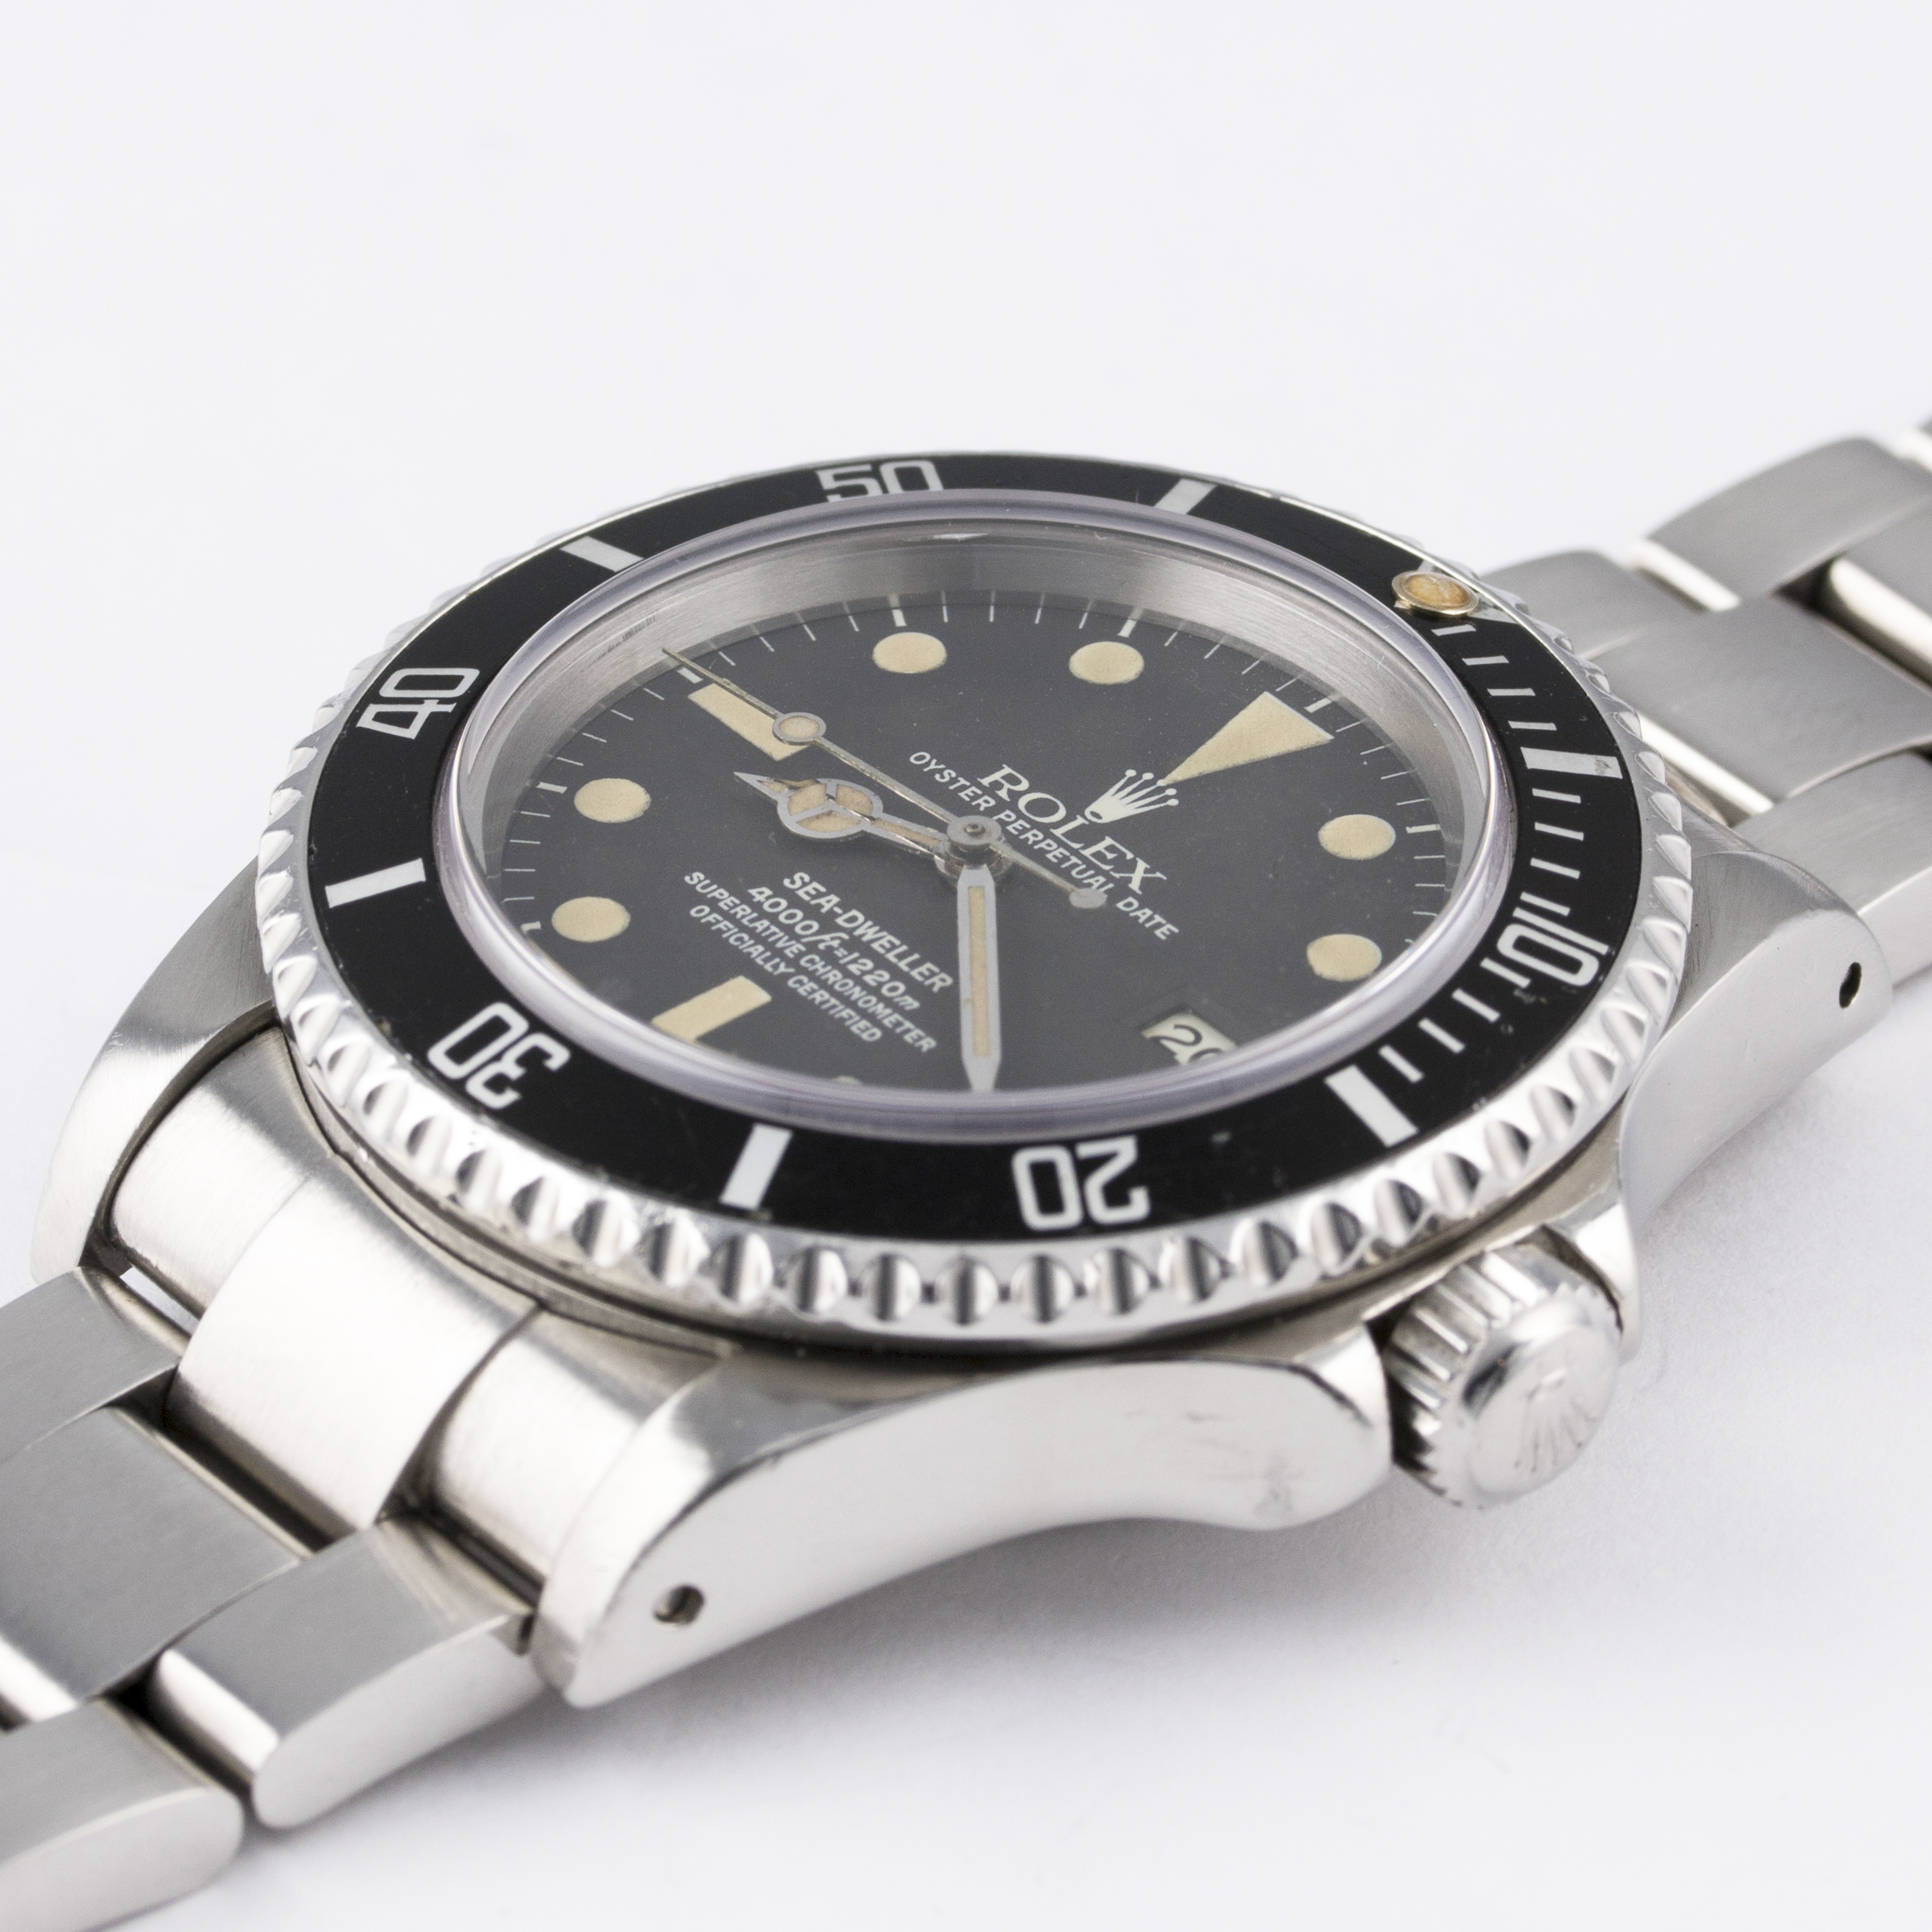 A RARE GENTLEMAN'S STAINLESS STEEL ROLEX OYSTER PERPETUAL DATE SEA DWELLER BRACELET WATCH CIRCA - Image 4 of 8